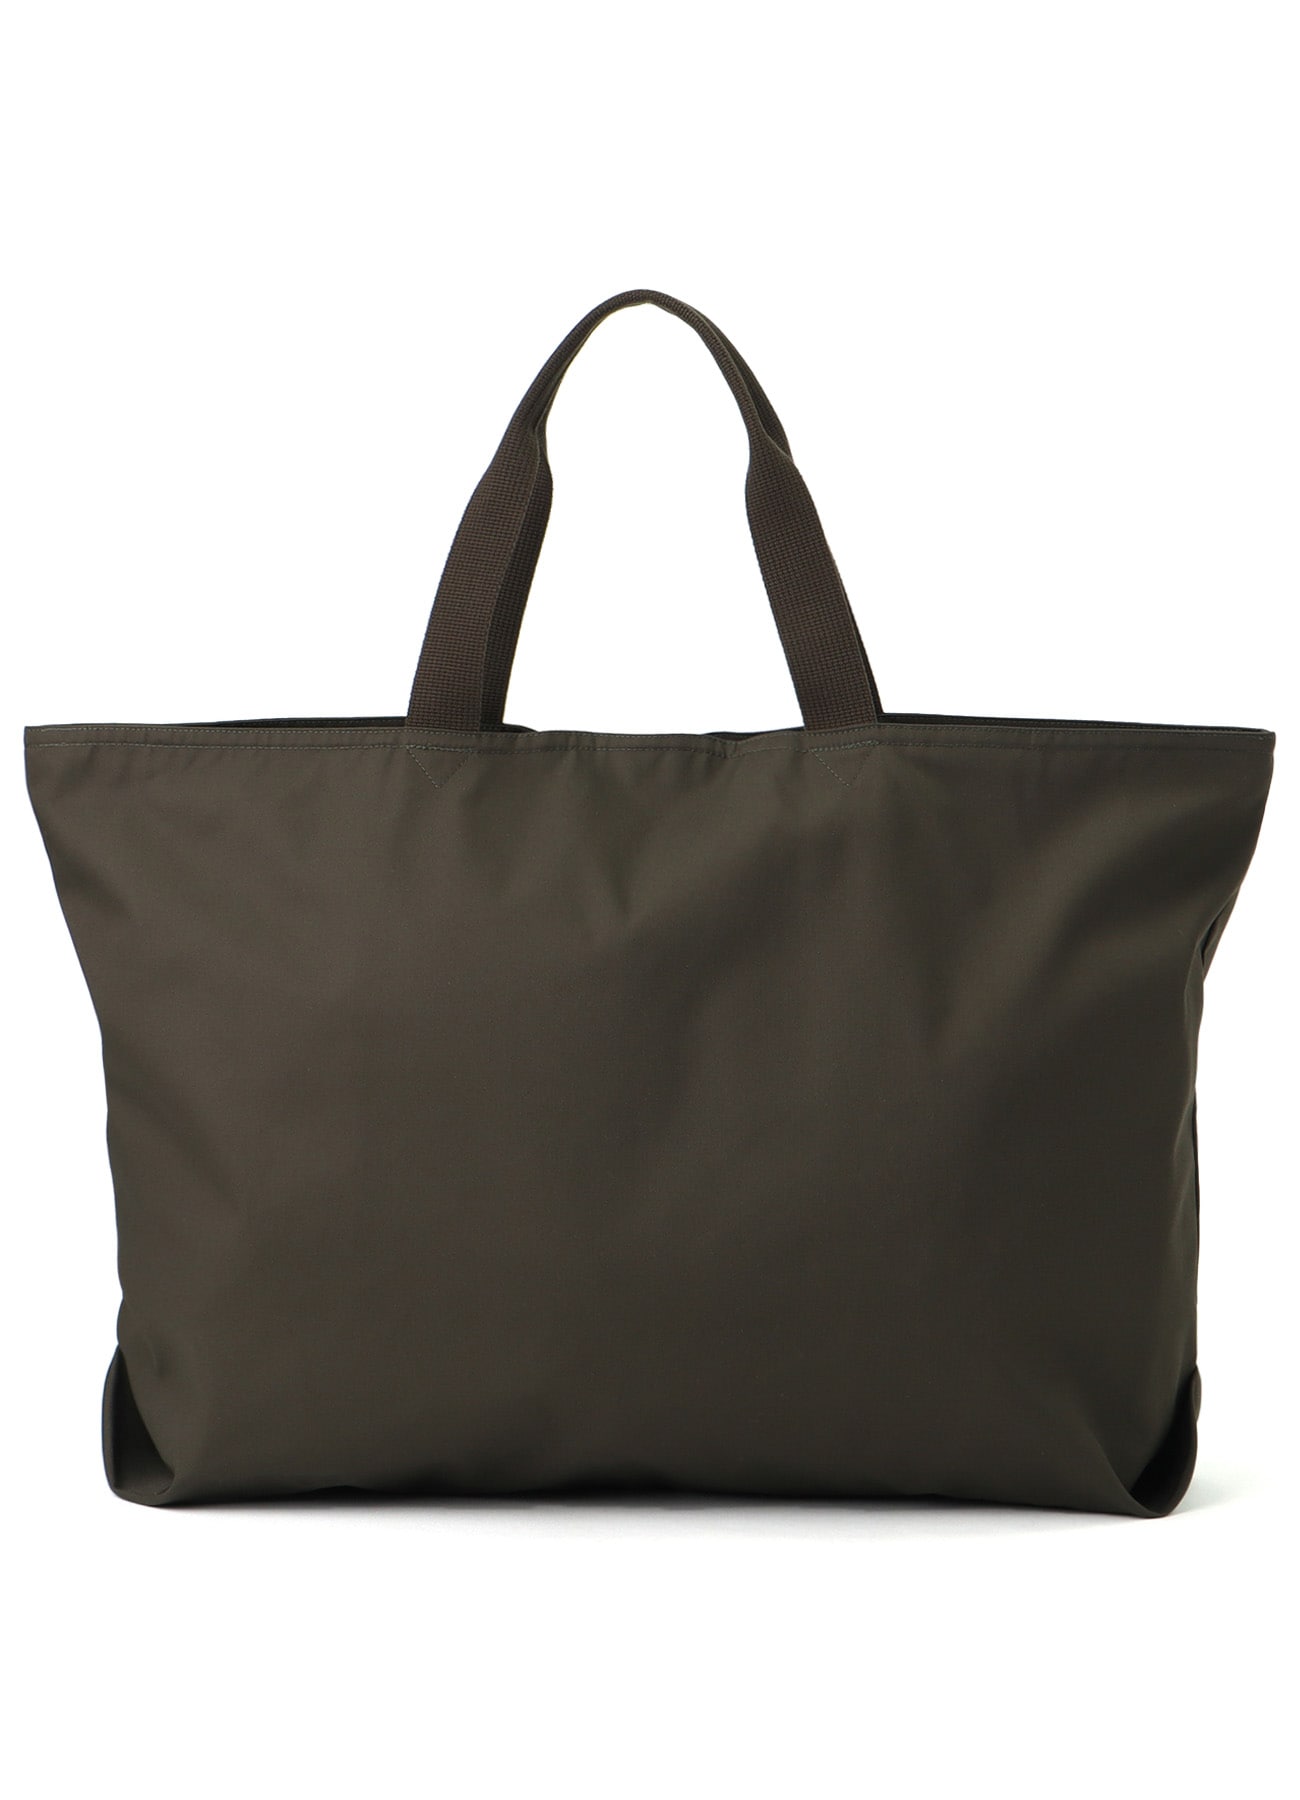 POLYESTER/COTTON TWILL "LEASE" BAG